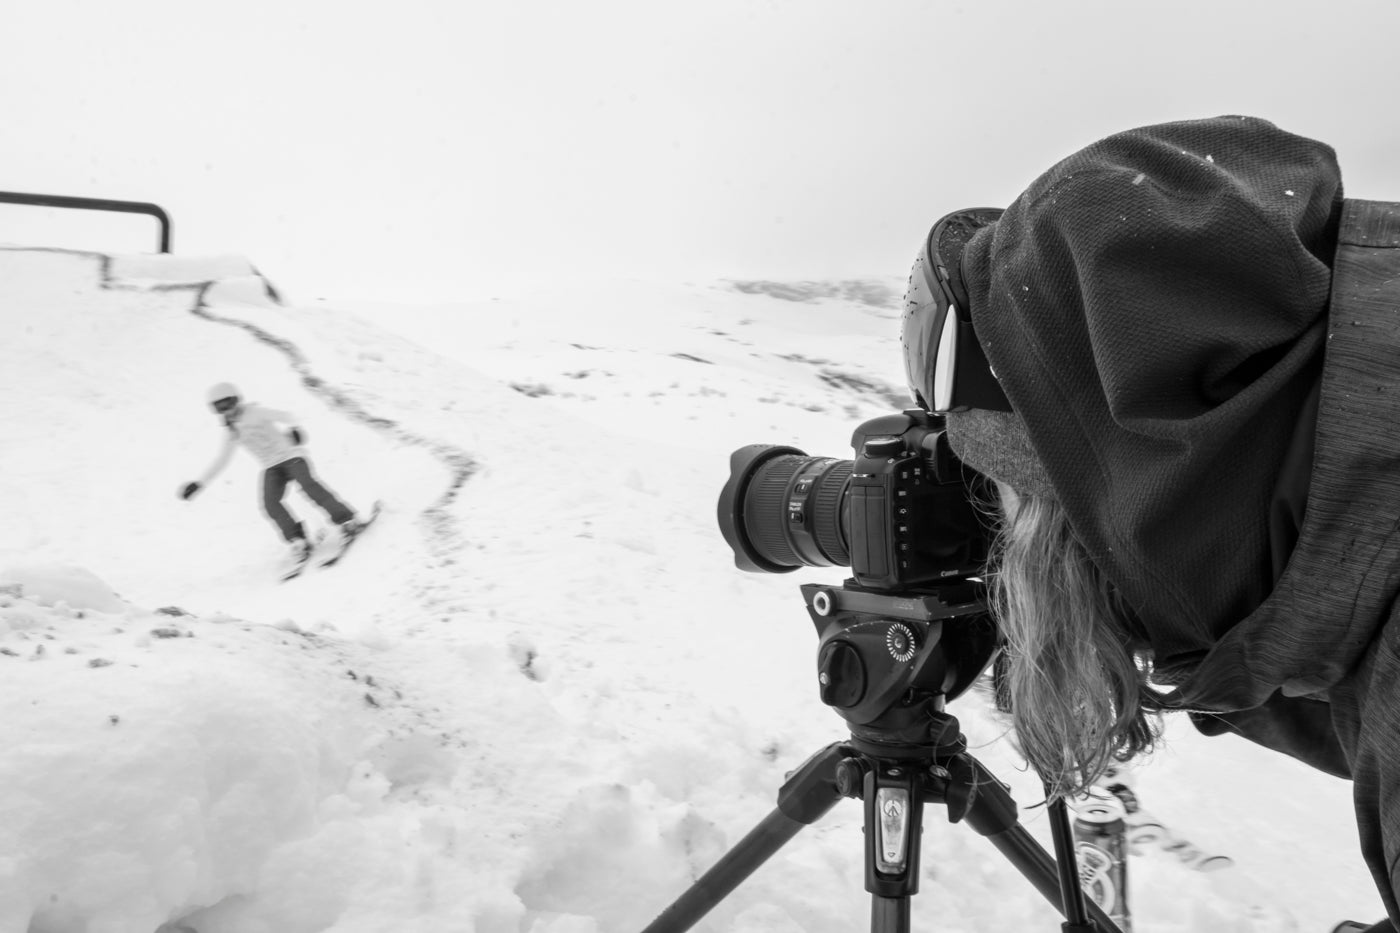 Photographer taking a photo of a skier